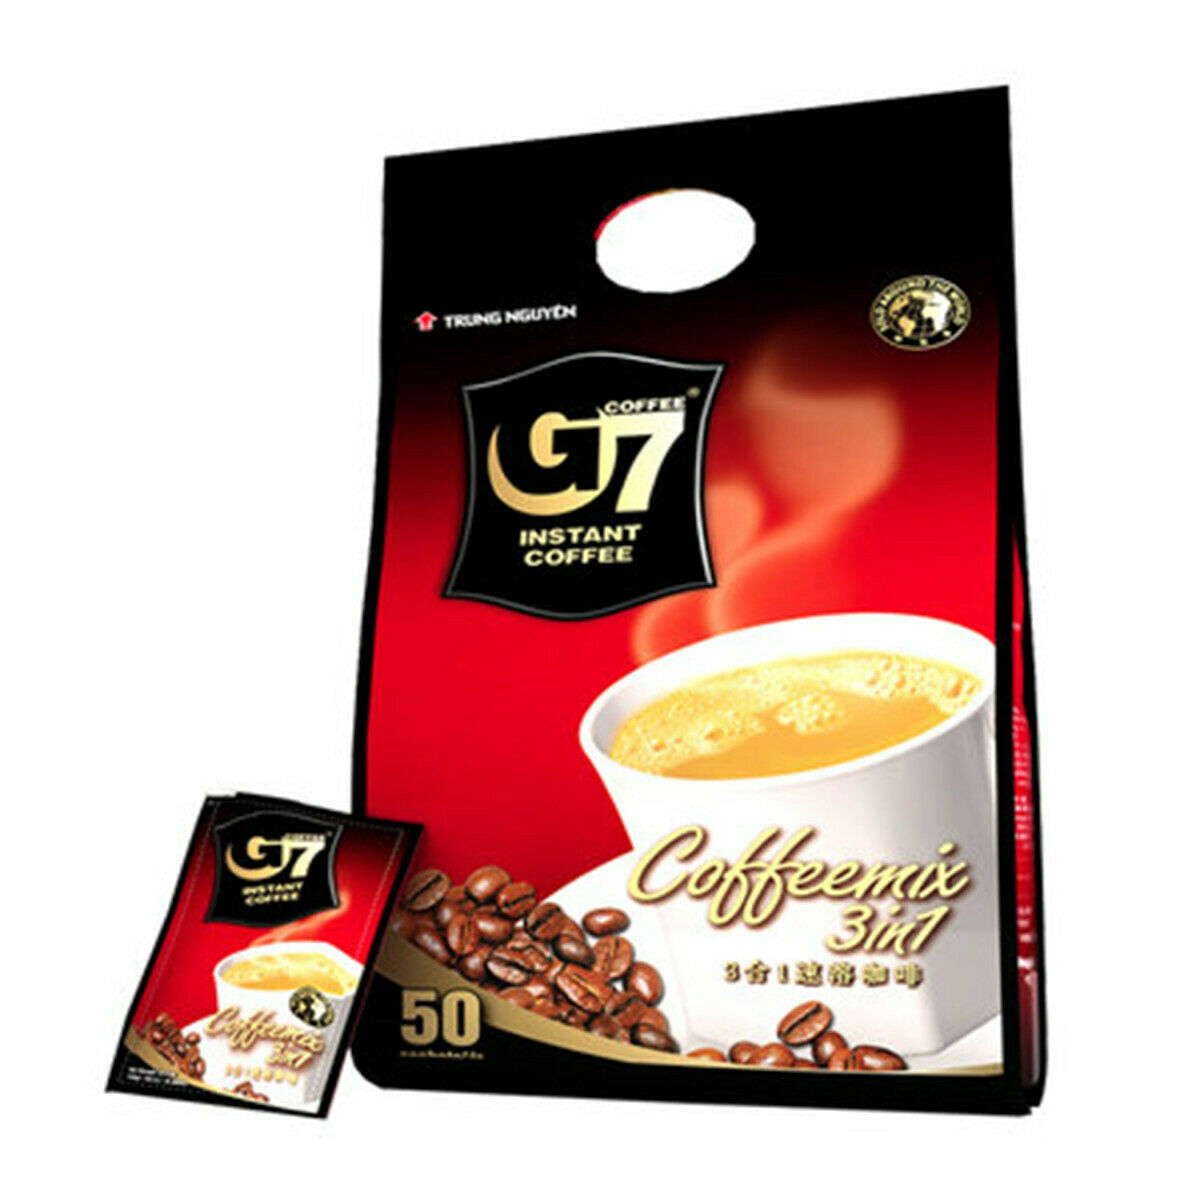 HelloYoung 800g Delicious Instant Coffee Authentic Vietnam Slimming Coffee Loss Weight